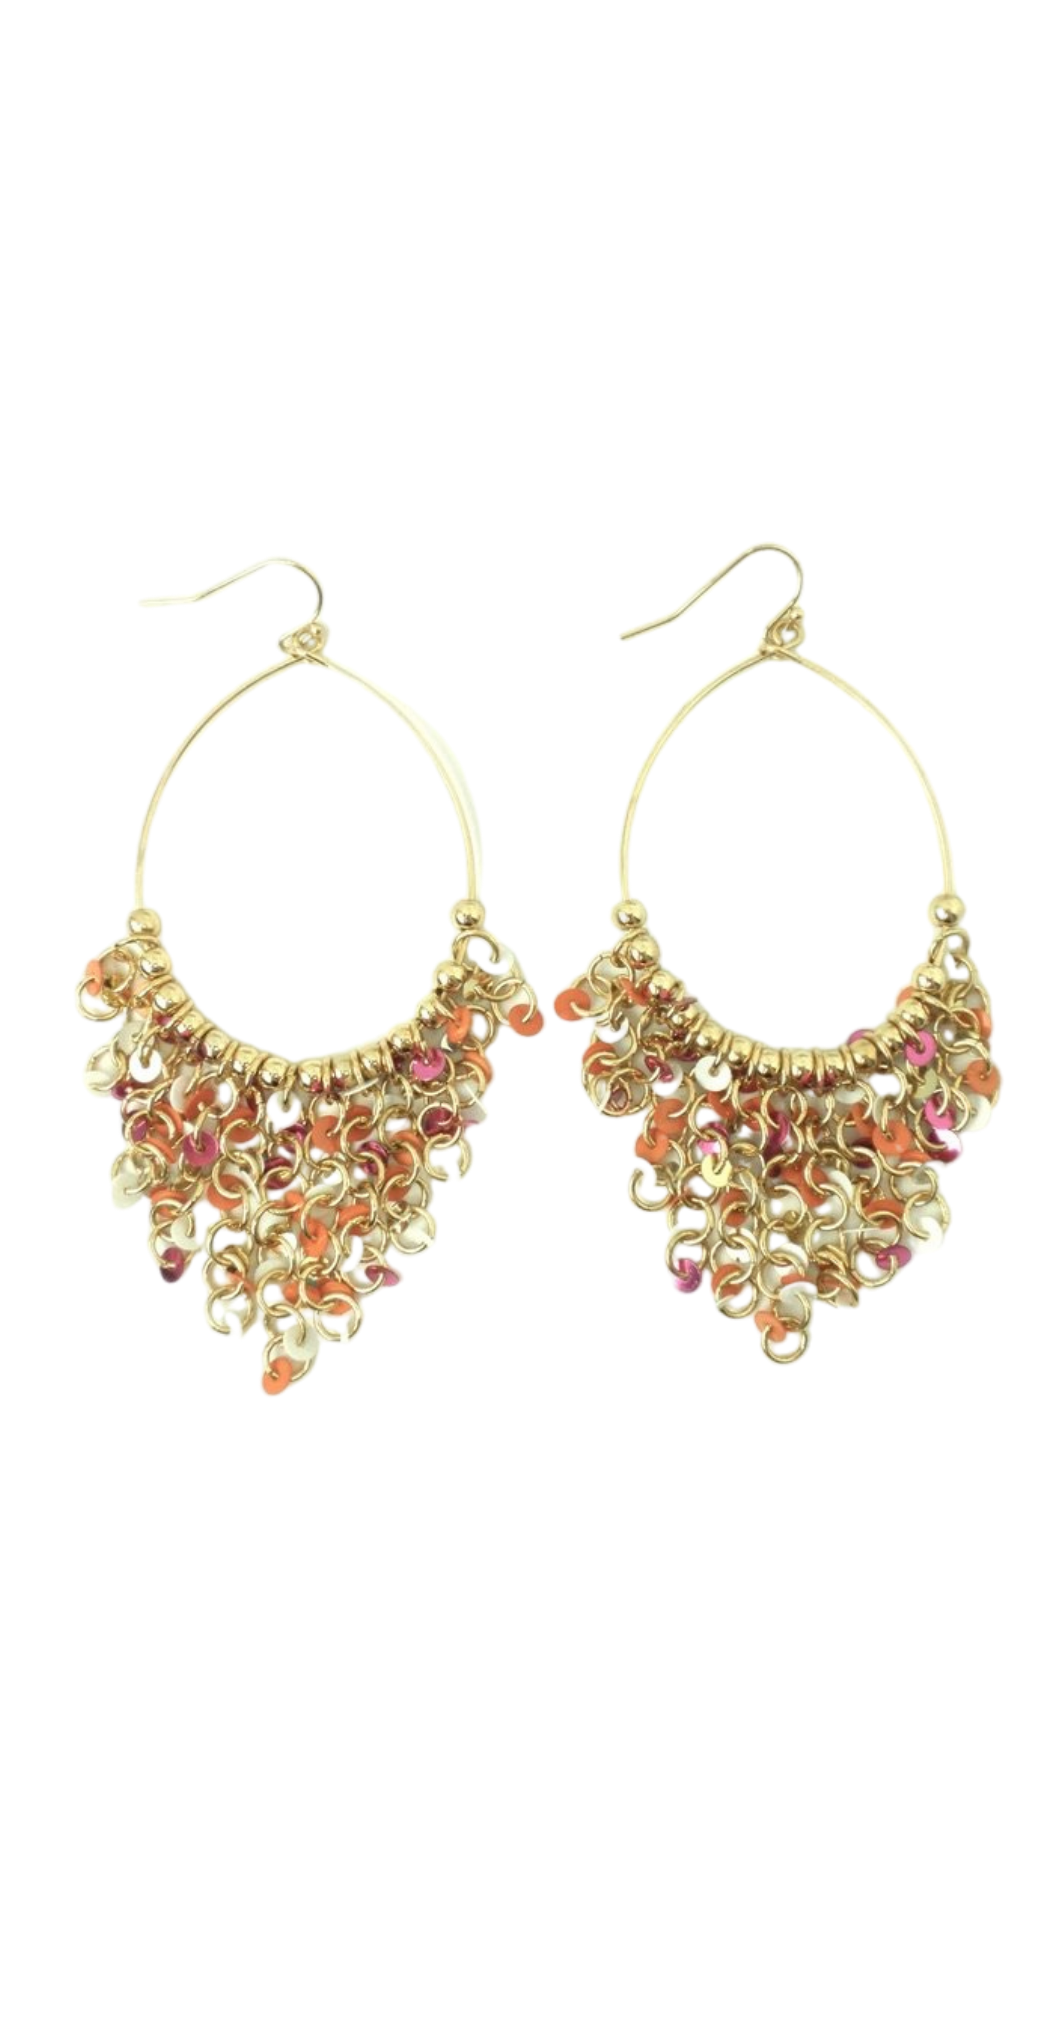 Gold Dangling Earrings with Sequins - The Fashion Foundation - {{ discount designer}}